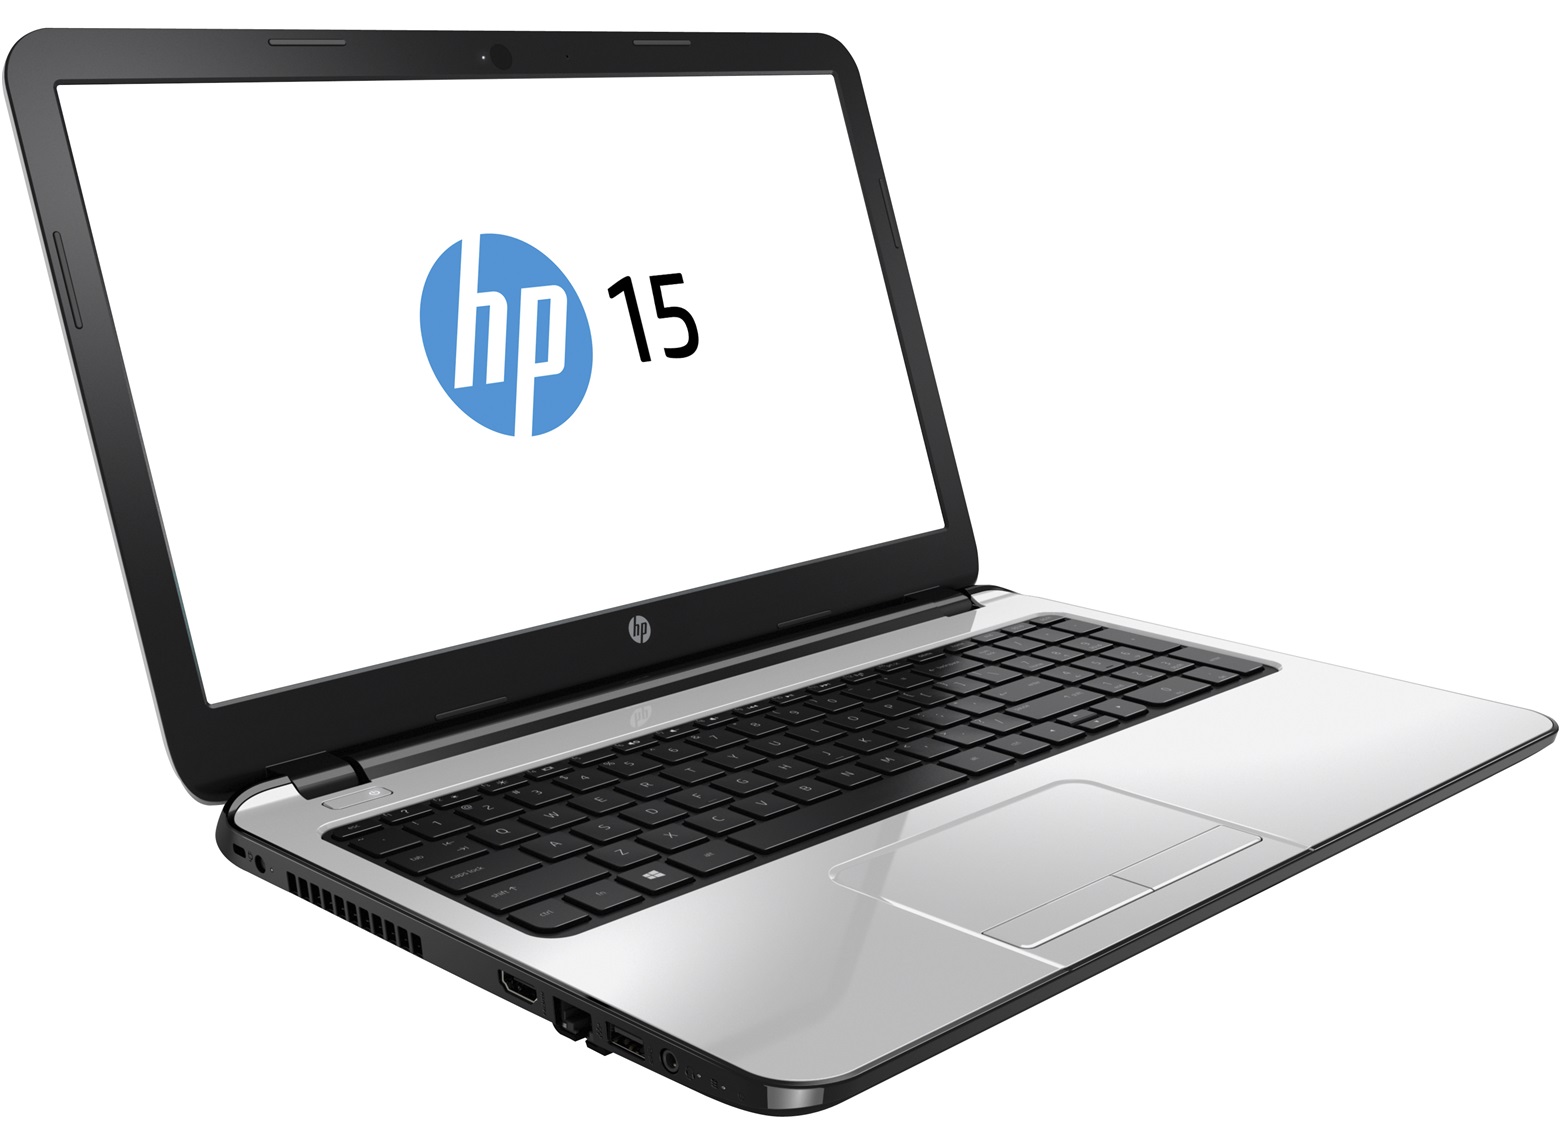 HP 15-g004nf - PC Portable Boutique HP